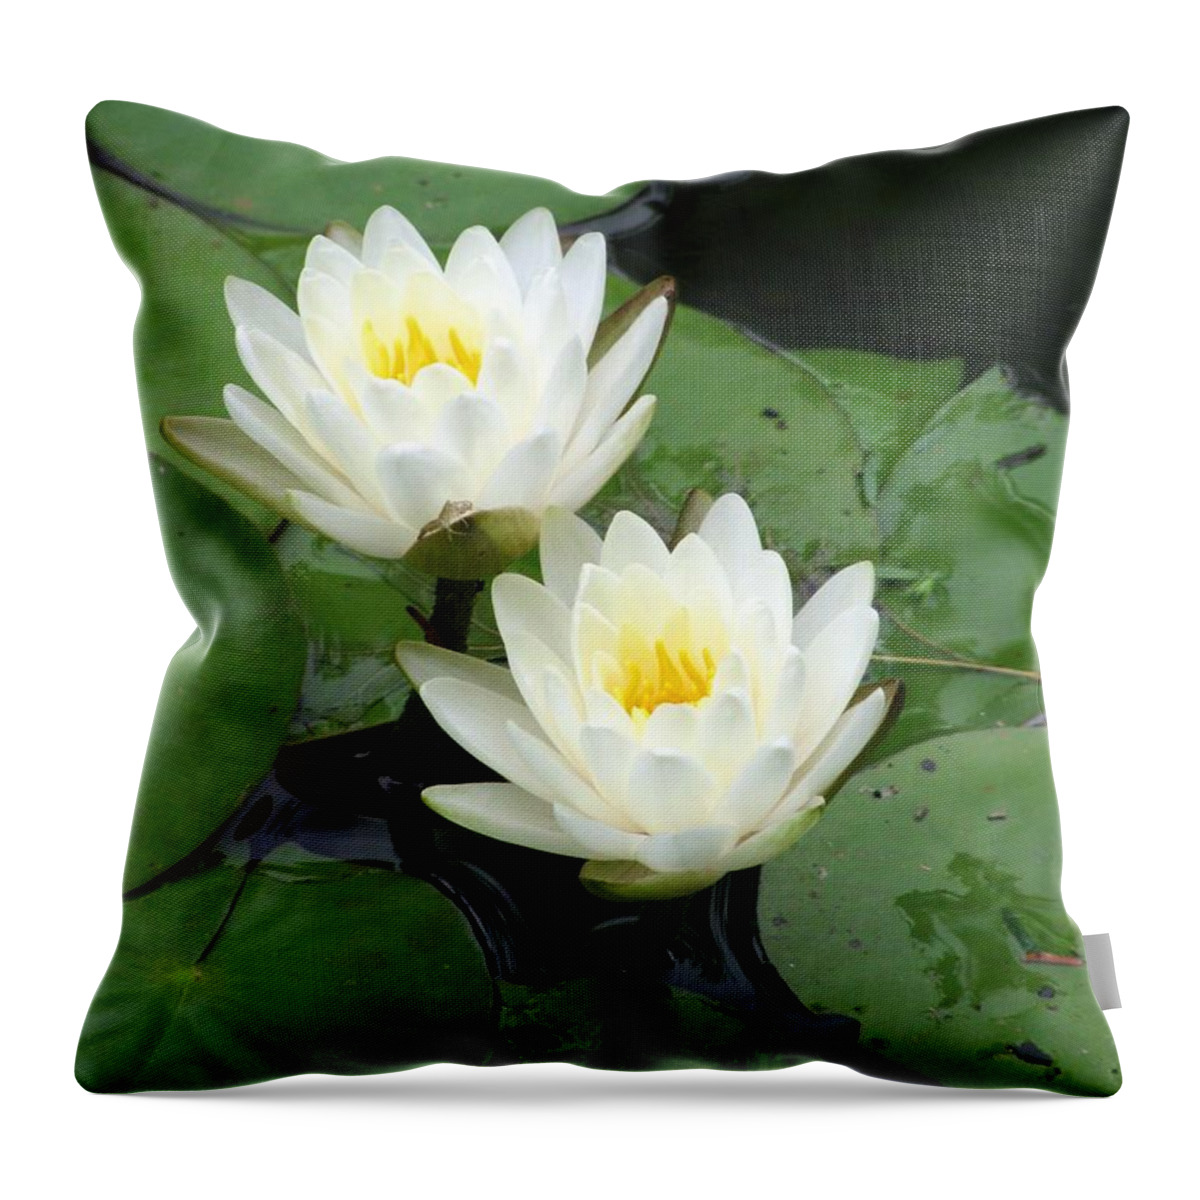 Water Lilies Throw Pillow featuring the photograph The Water Lilies Collection - 07 by Pamela Critchlow